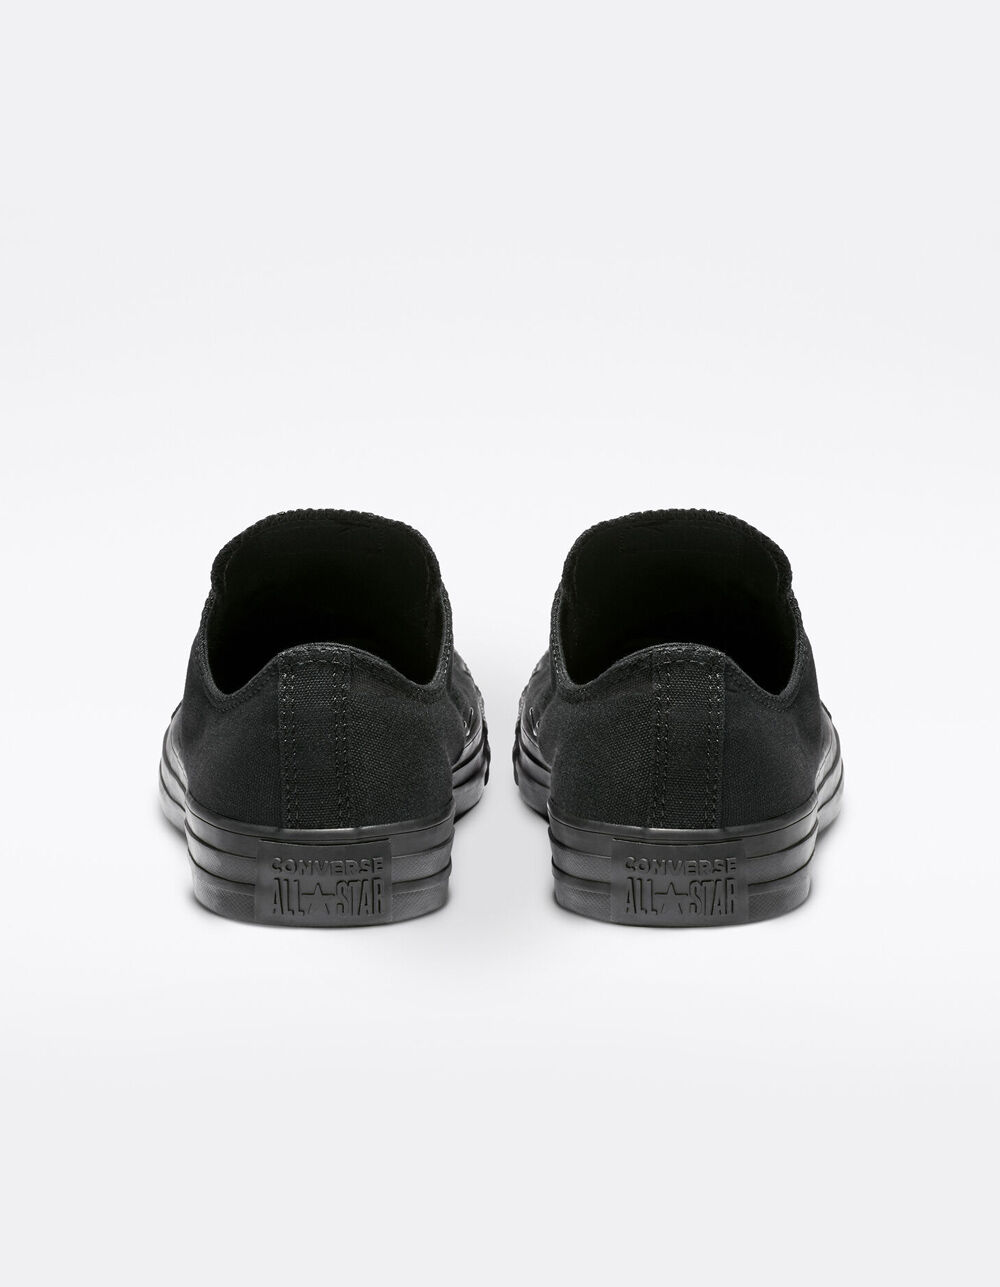 CONVERSE Chuck Taylor All Star Black Low Top Shoes - BLKBL | Tillys